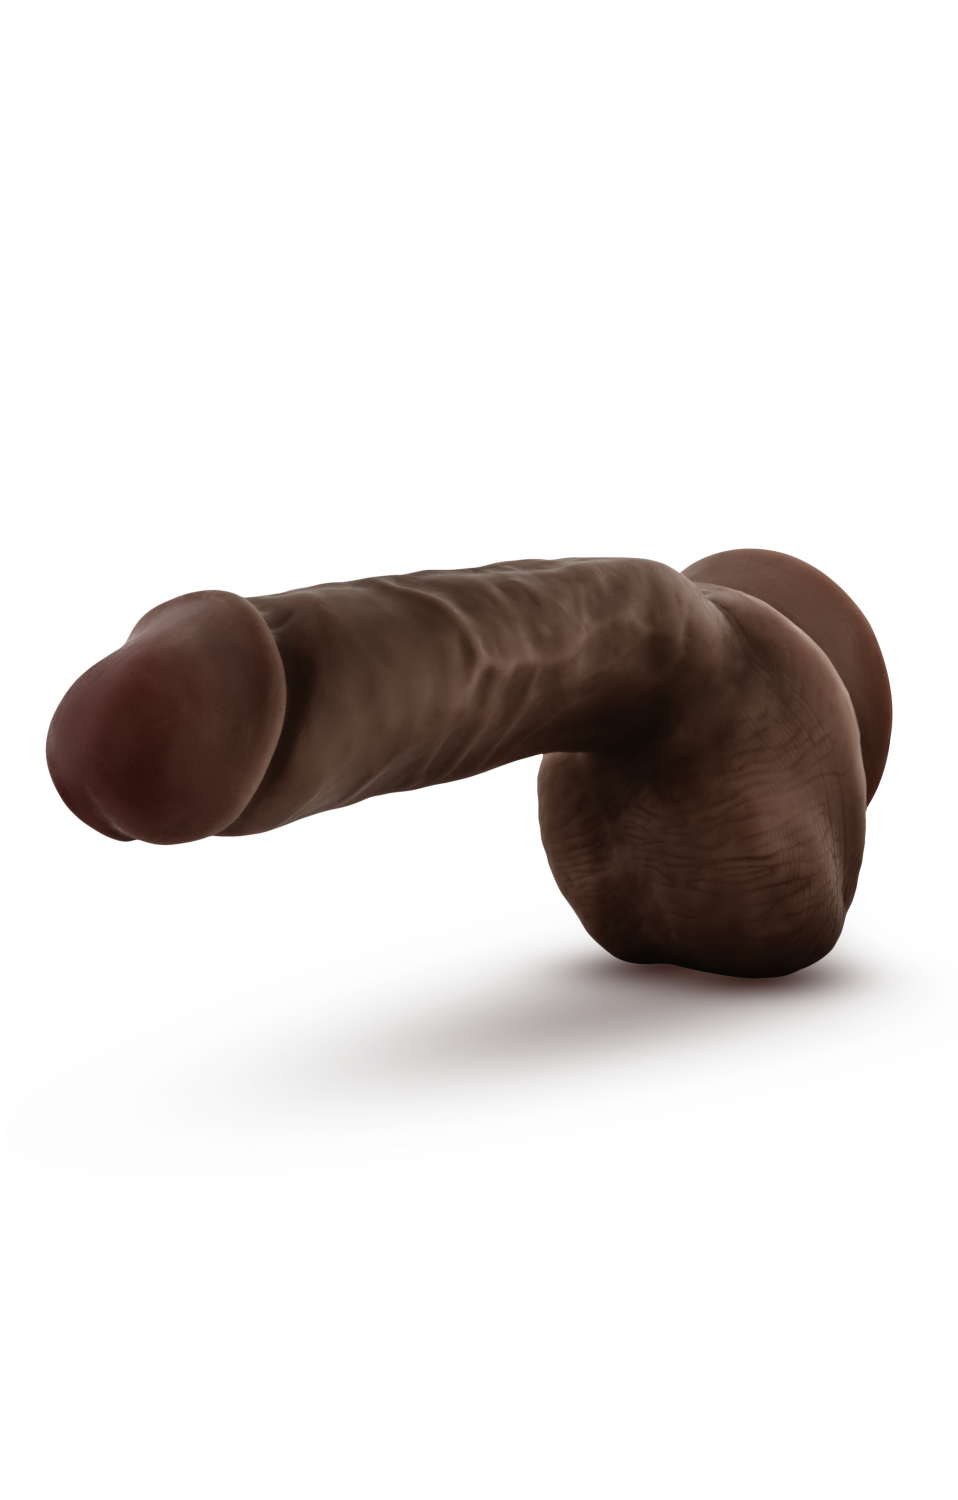 Dr. Skin Glide Self-Lubricating Dildo With Balls 8.5 in. - Chocolate